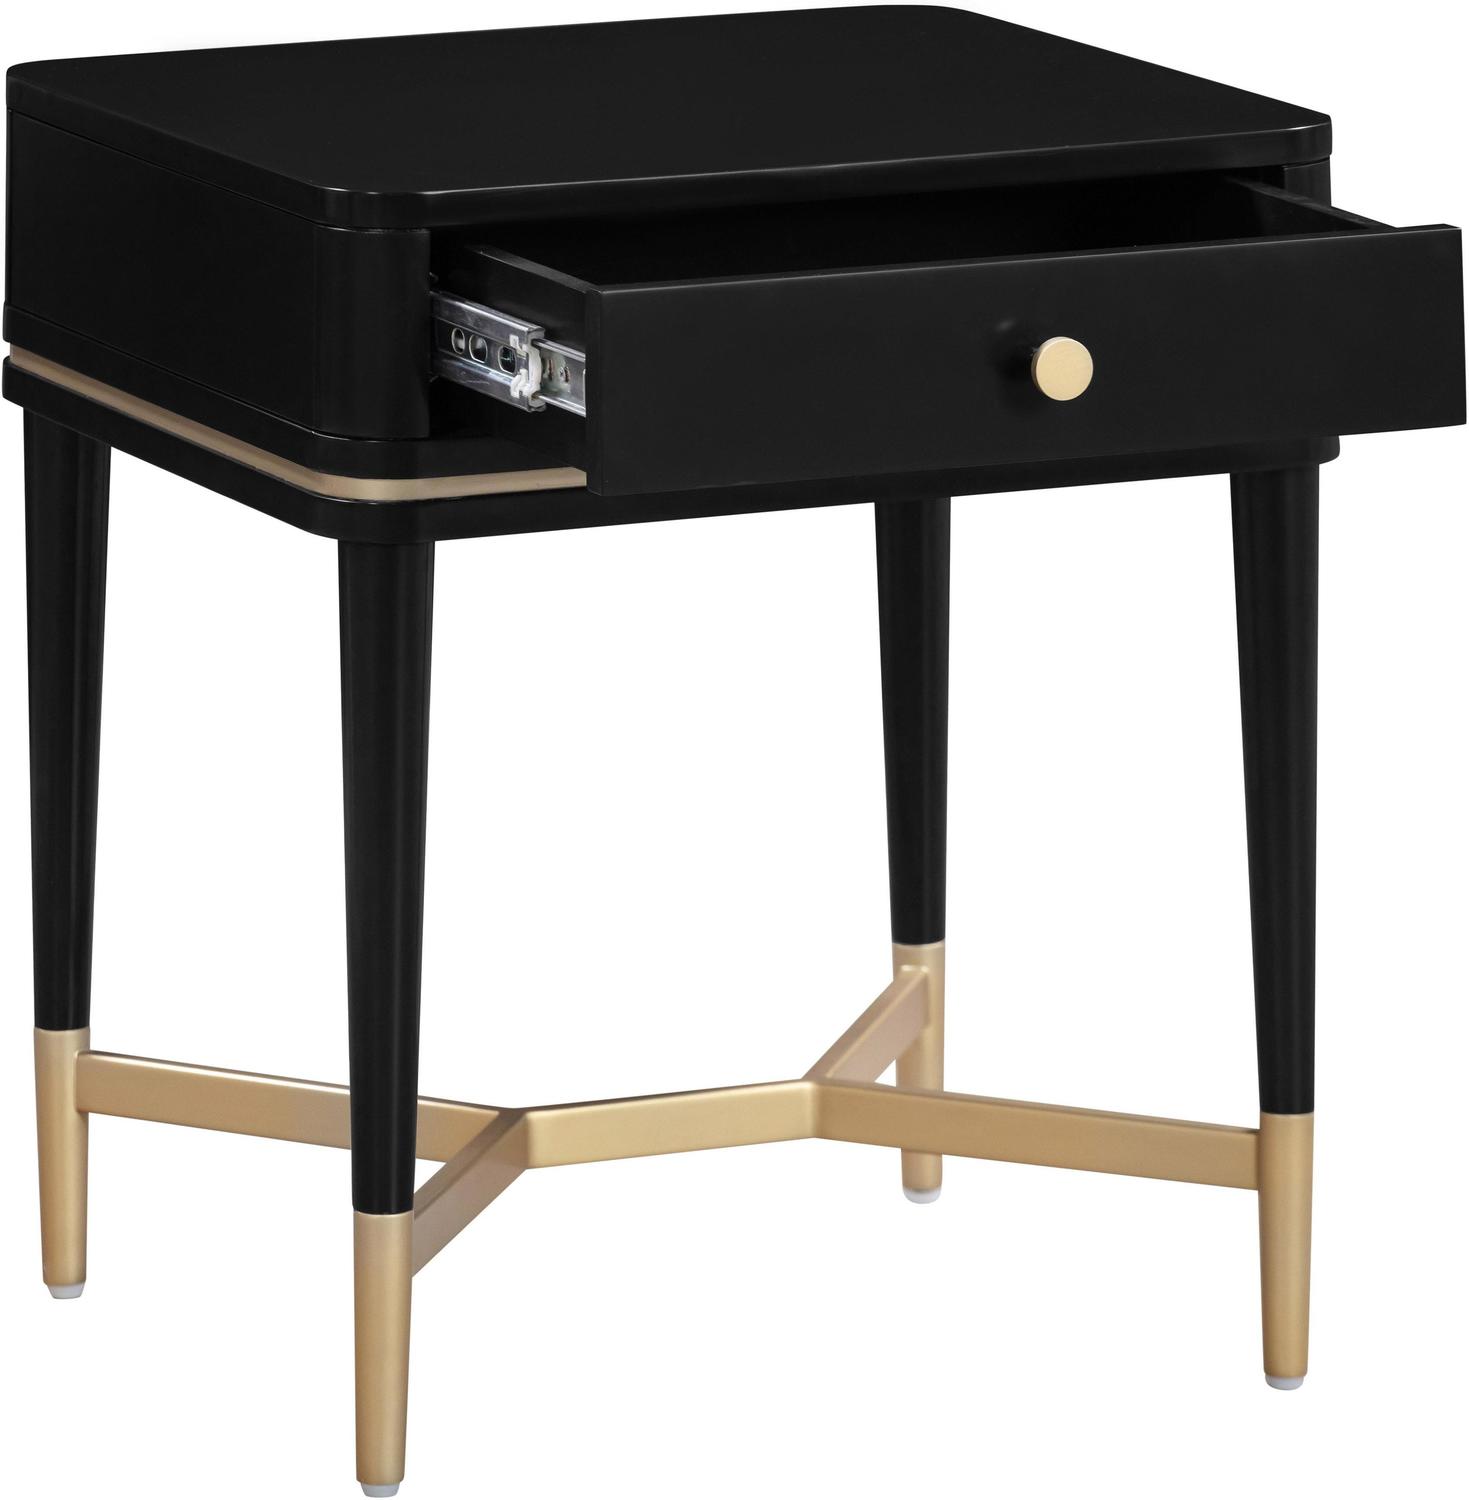 nightstand tables set of 2 Contemporary Design Furniture Nightstands Black